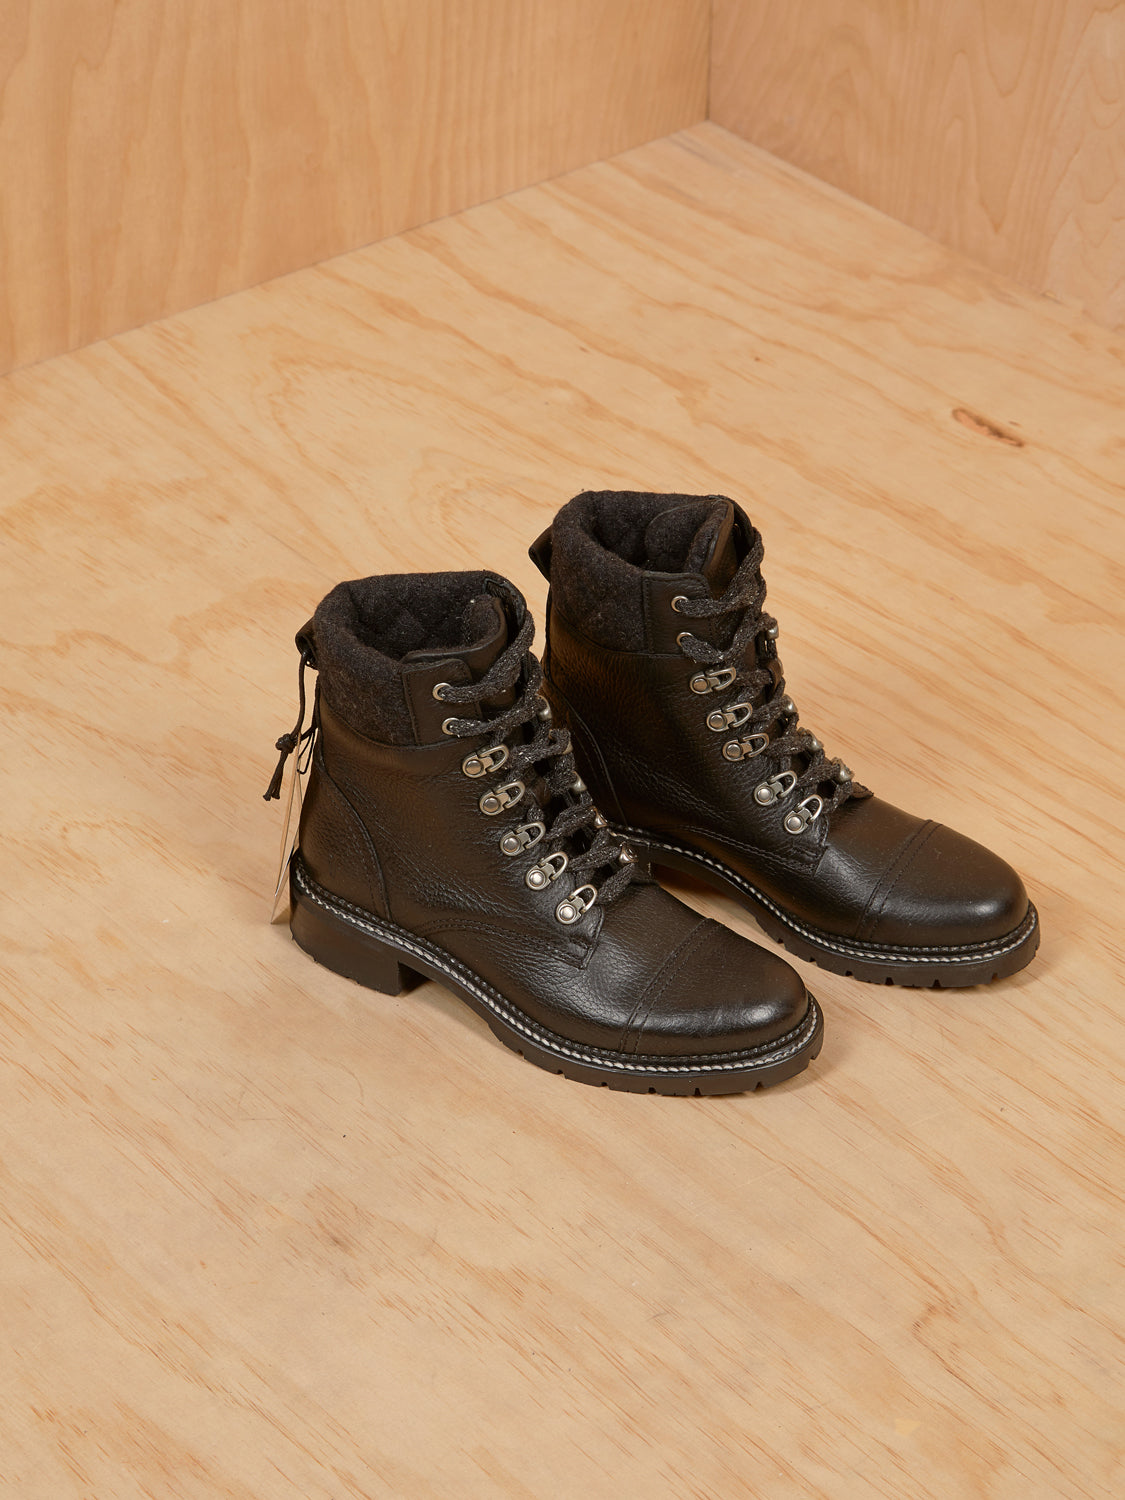 Frye Combat Style Ankle Boot